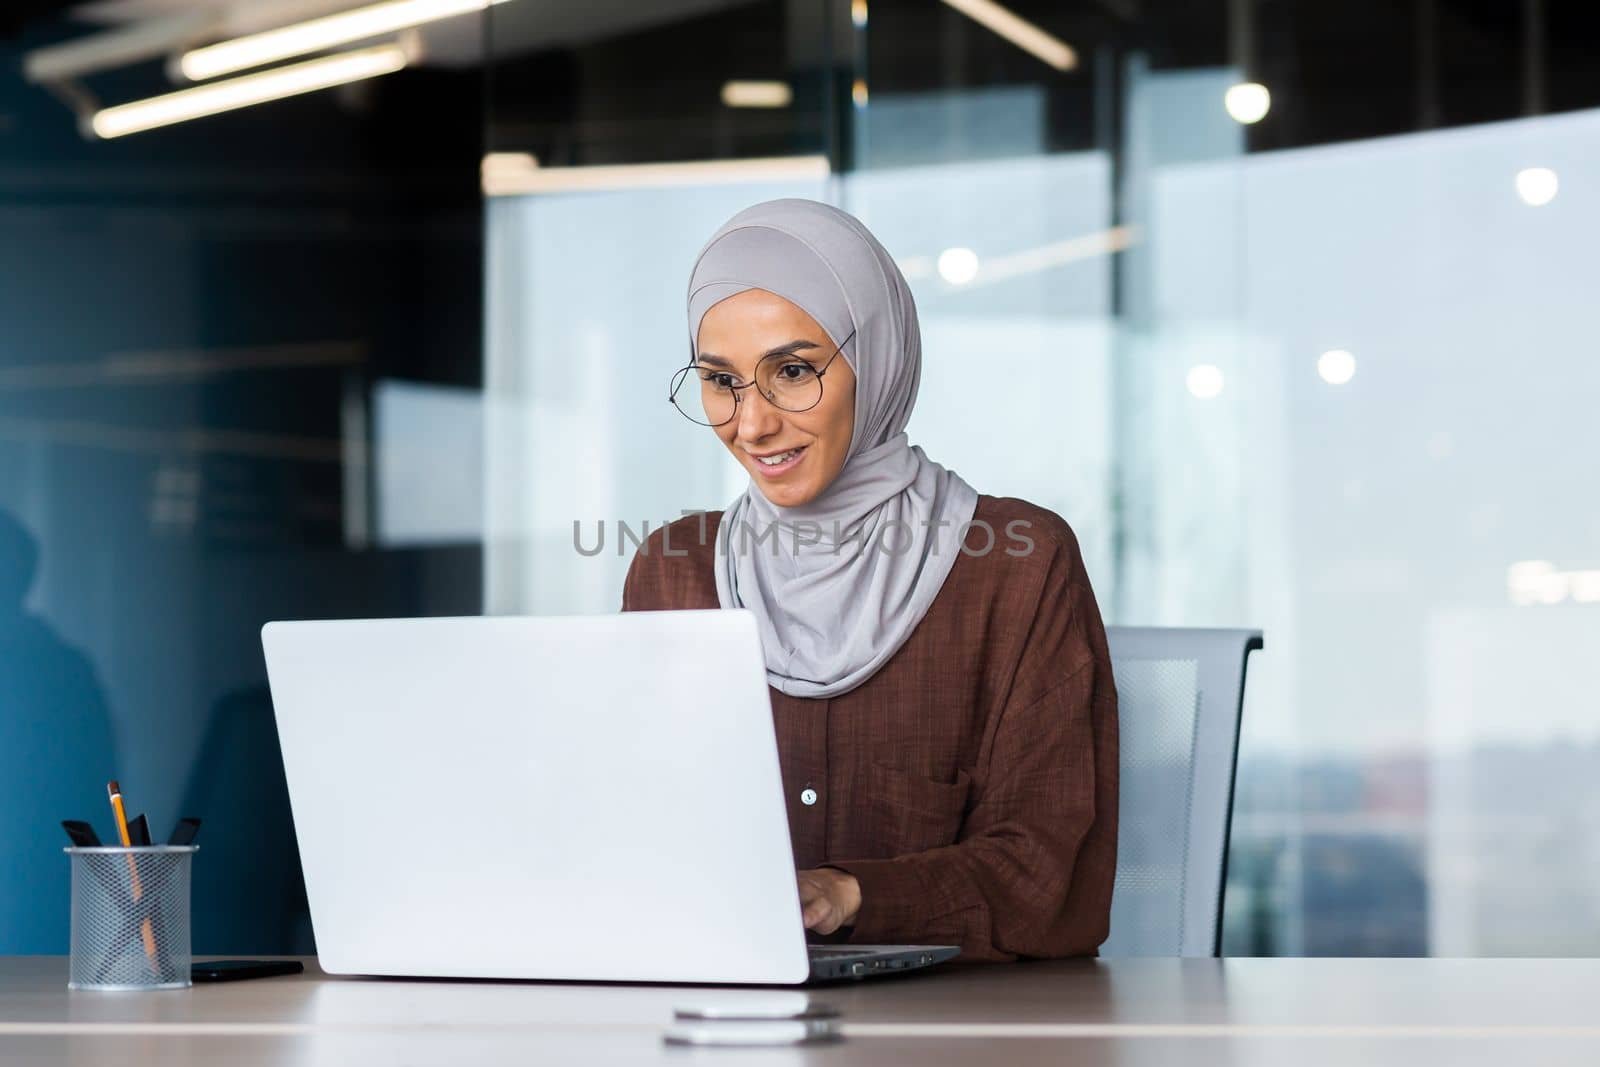 Smiling and dreamy businesswoman working inside office with laptop, woman in hijab and glasses office worker happy and satisfied with work sitting at desk.